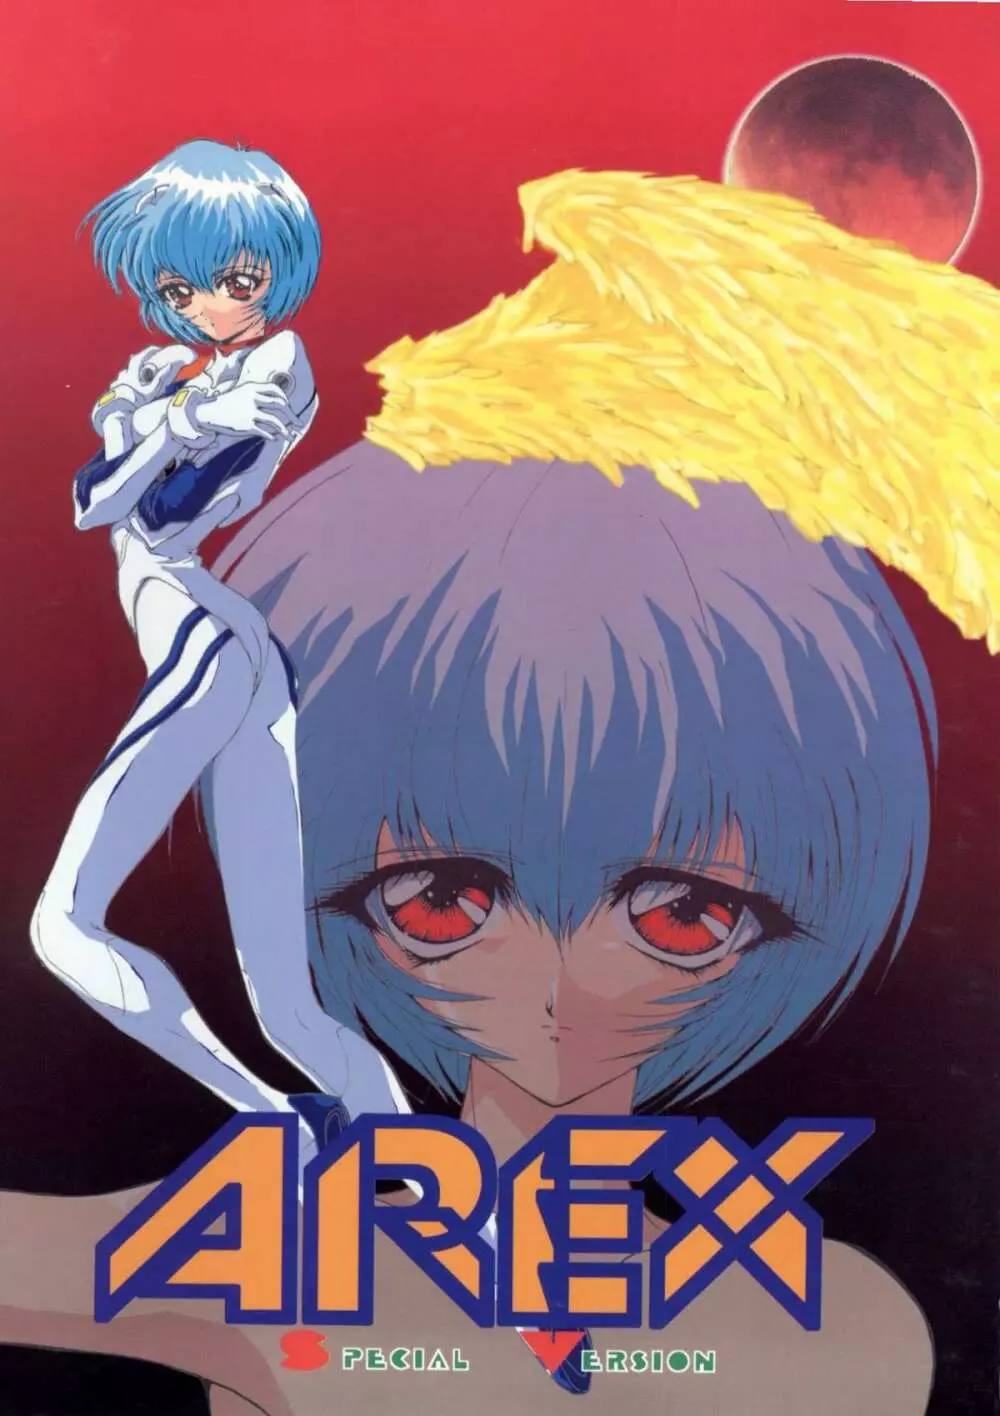 AREX SPECIAL VERSION